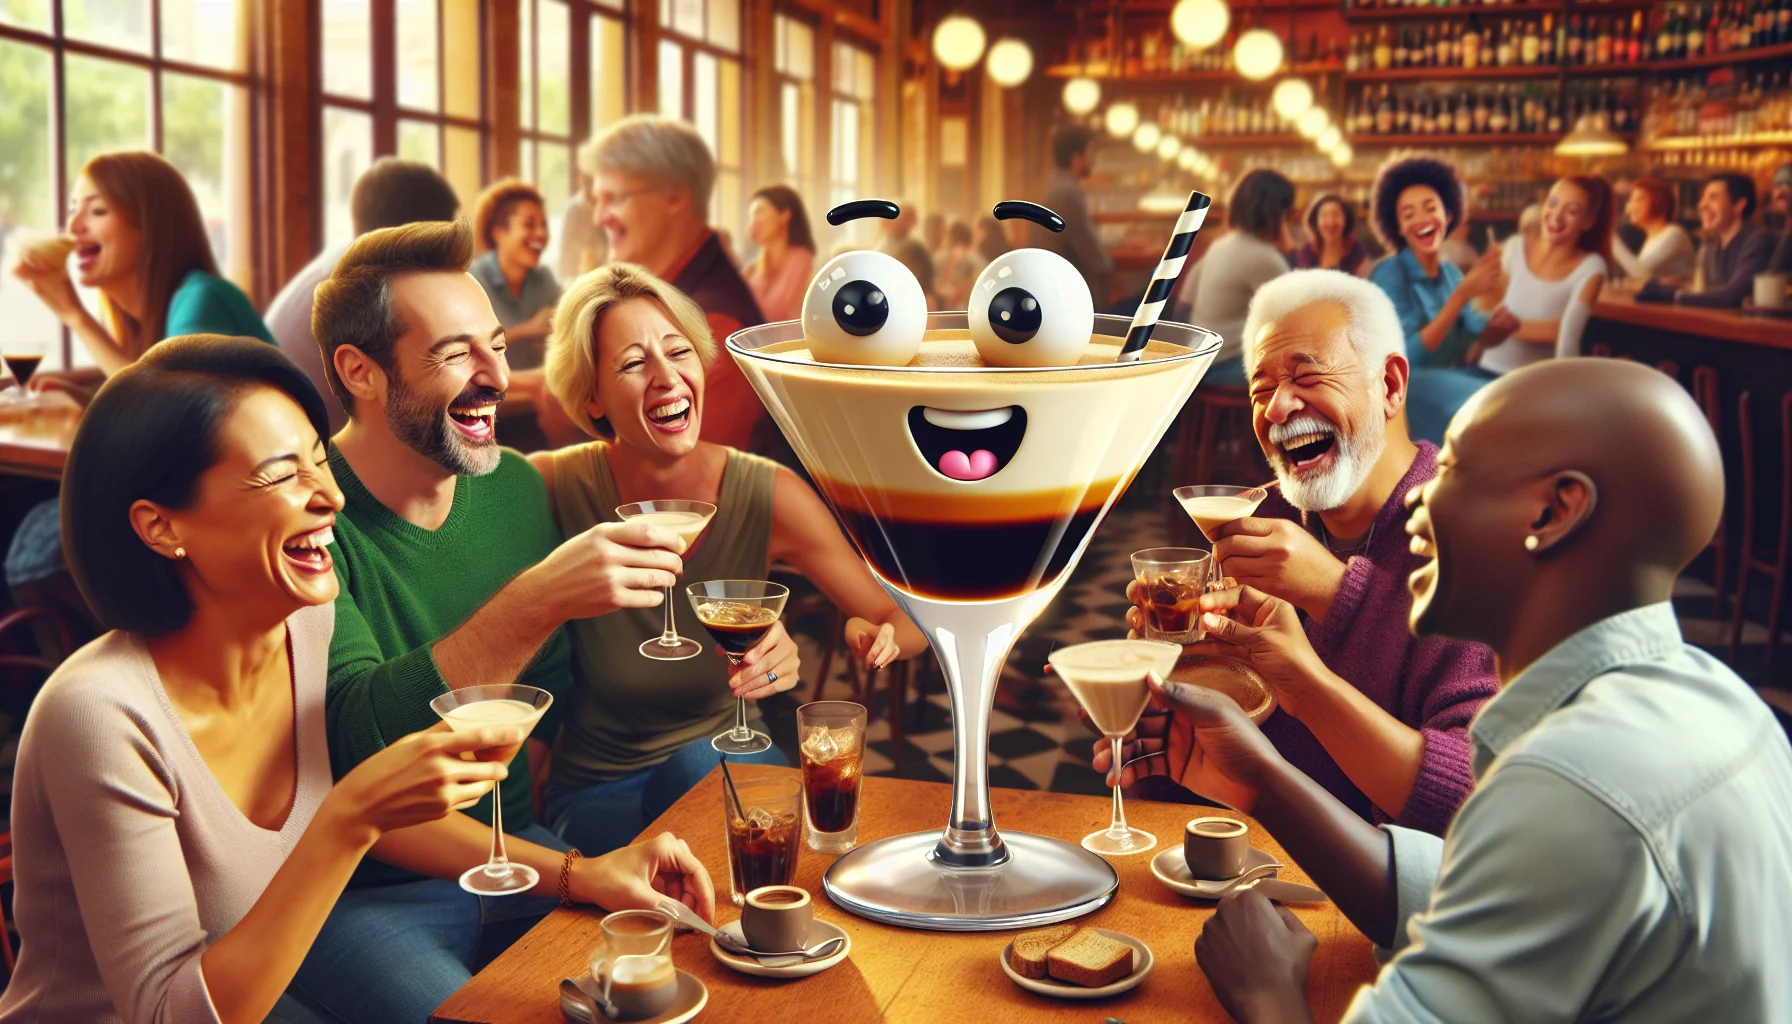 Imagine a lighthearted and funny scene at a bustling café. An animated espresso martini glass filled with Baileys is behaving like a lovable character, encouraging people to unwind. The glass has cute googly eyes and is spreading cheer among a group of diverse people - a middle-aged Caucasian woman, a young Hispanic man, a South Asian teenager, and an elderly Black gentleman. The characters are laughing and toasting to good times, surrounded by the chatter and clink of café ambience. The warm atmosphere and joyous laughter make the scene truly inviting and heartwarming.